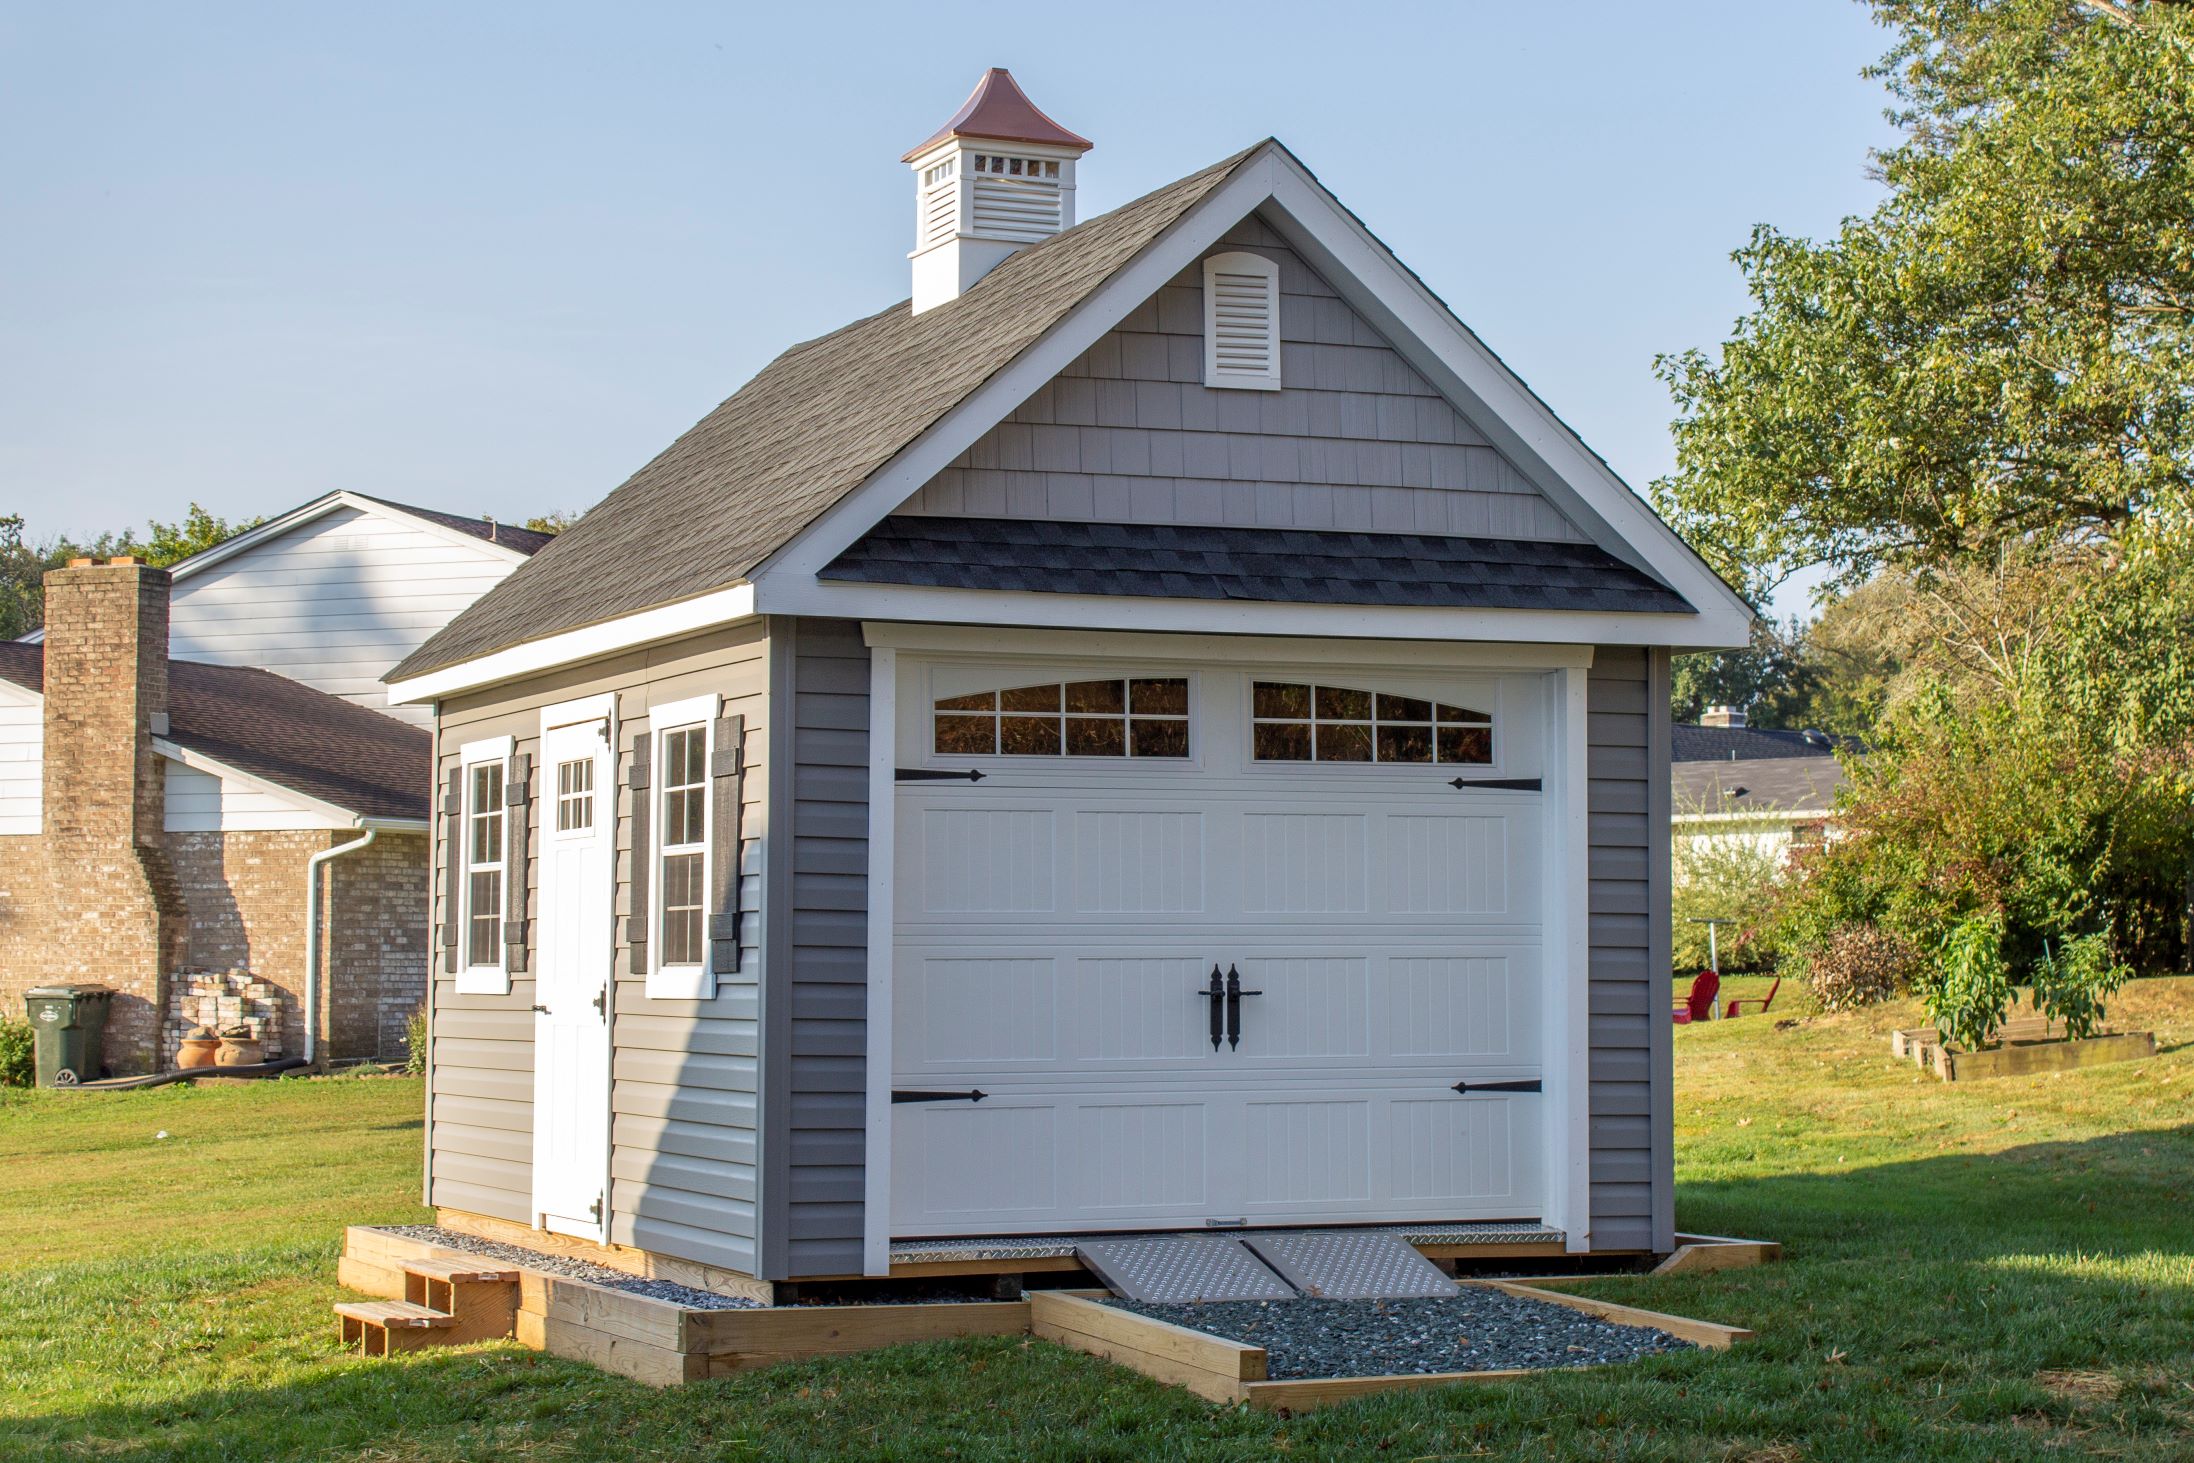 Exterior of a New England Barn Shed with gray siding and a white barn door.